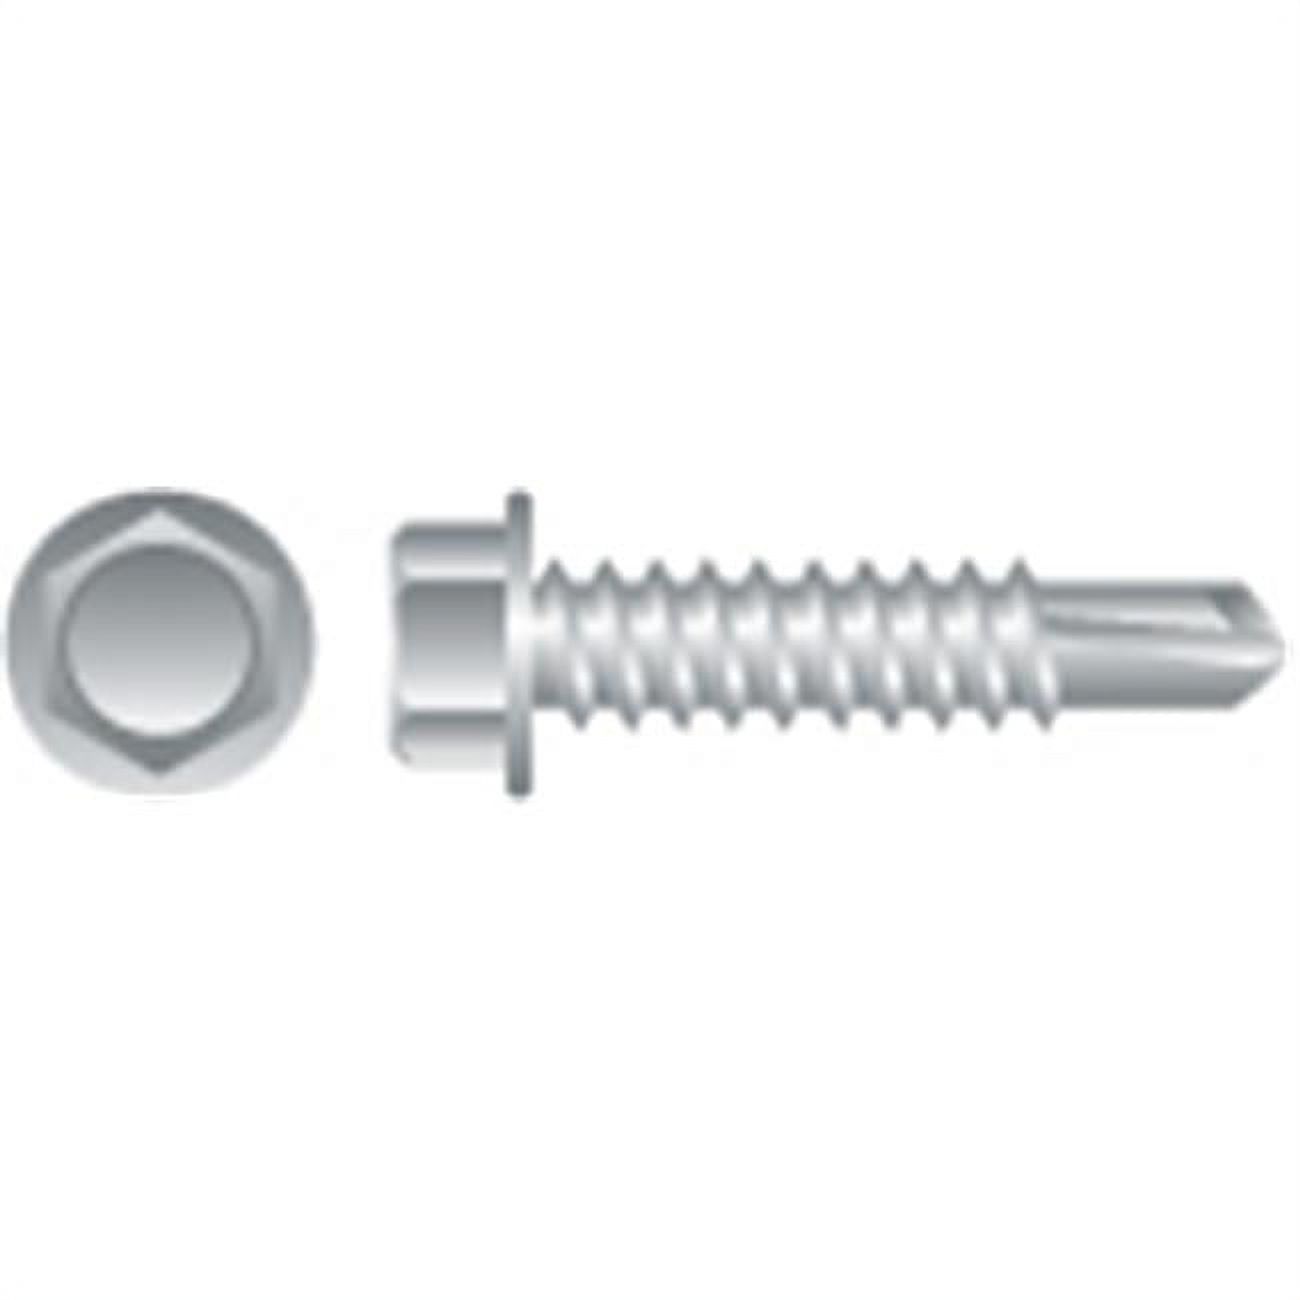 Strong-Point 4H1008 10-16 x 0.5 in. 410 Stainless Steel Unslotted Indented Hex Washer Head Screws  Passivated and Waxed  Box of 5 000 - image 1 of 1